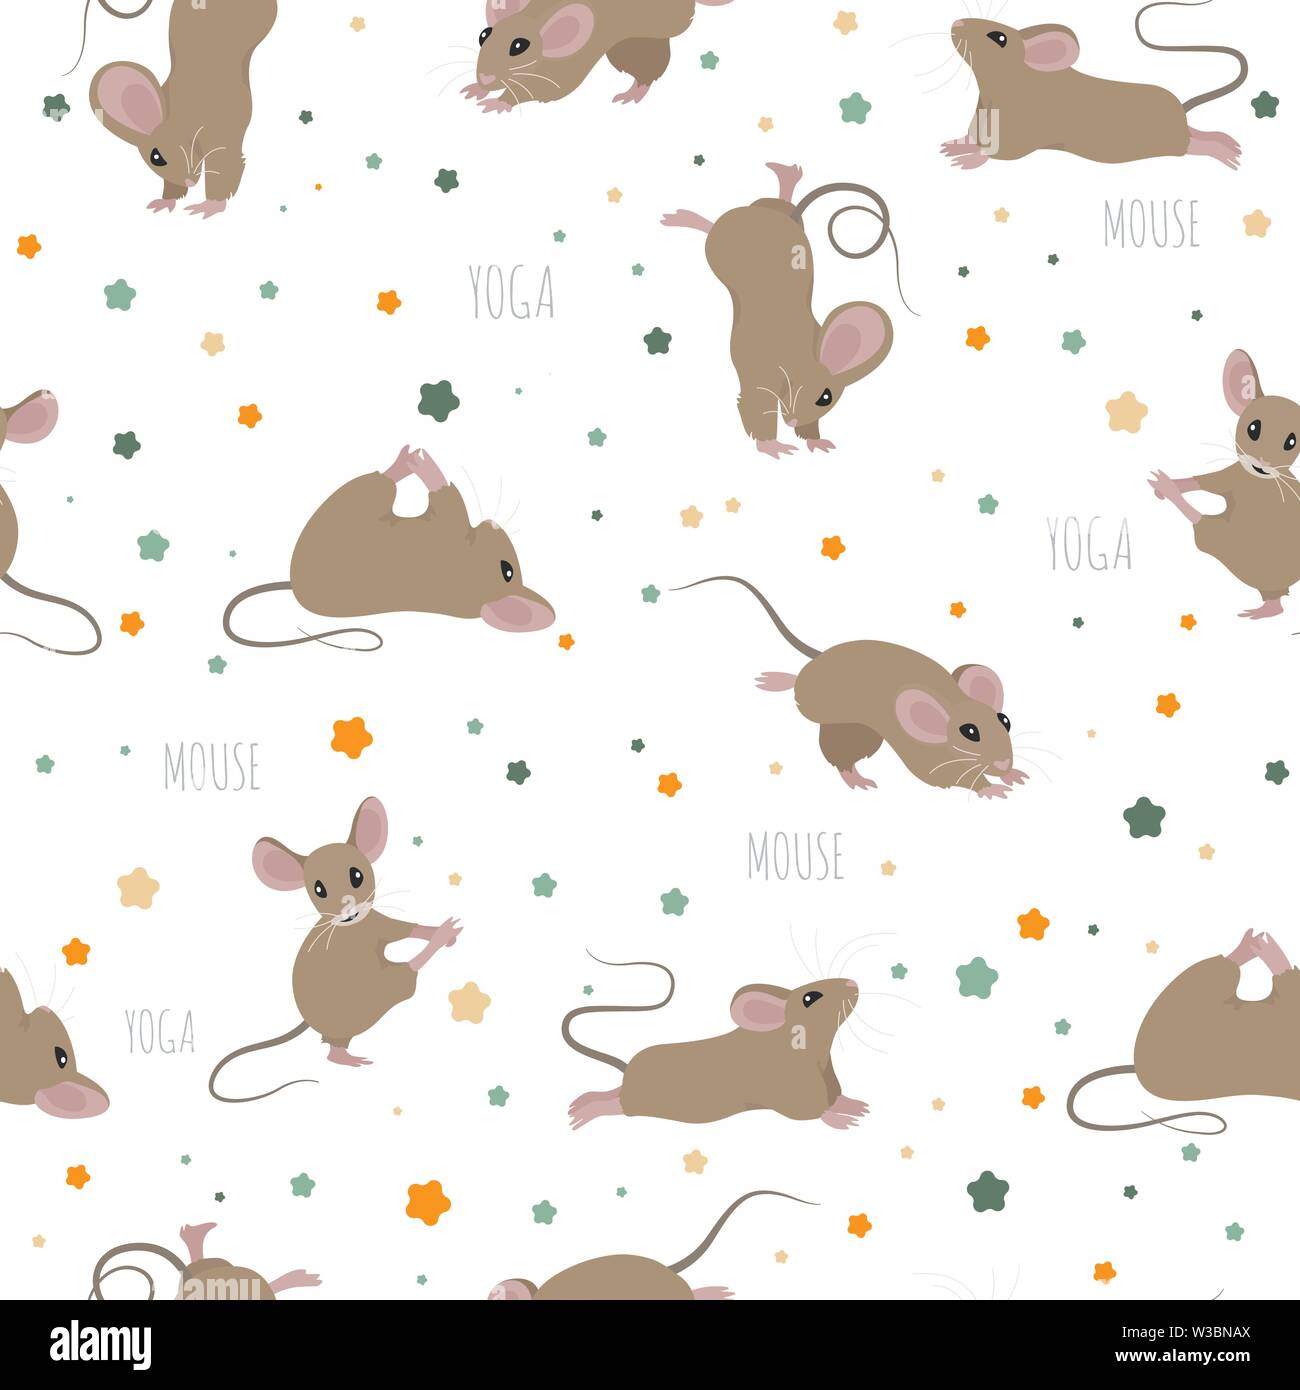 Mouse yoga poses and exercises. Cute cartoon clipart set. Vector illustration Stock Vector